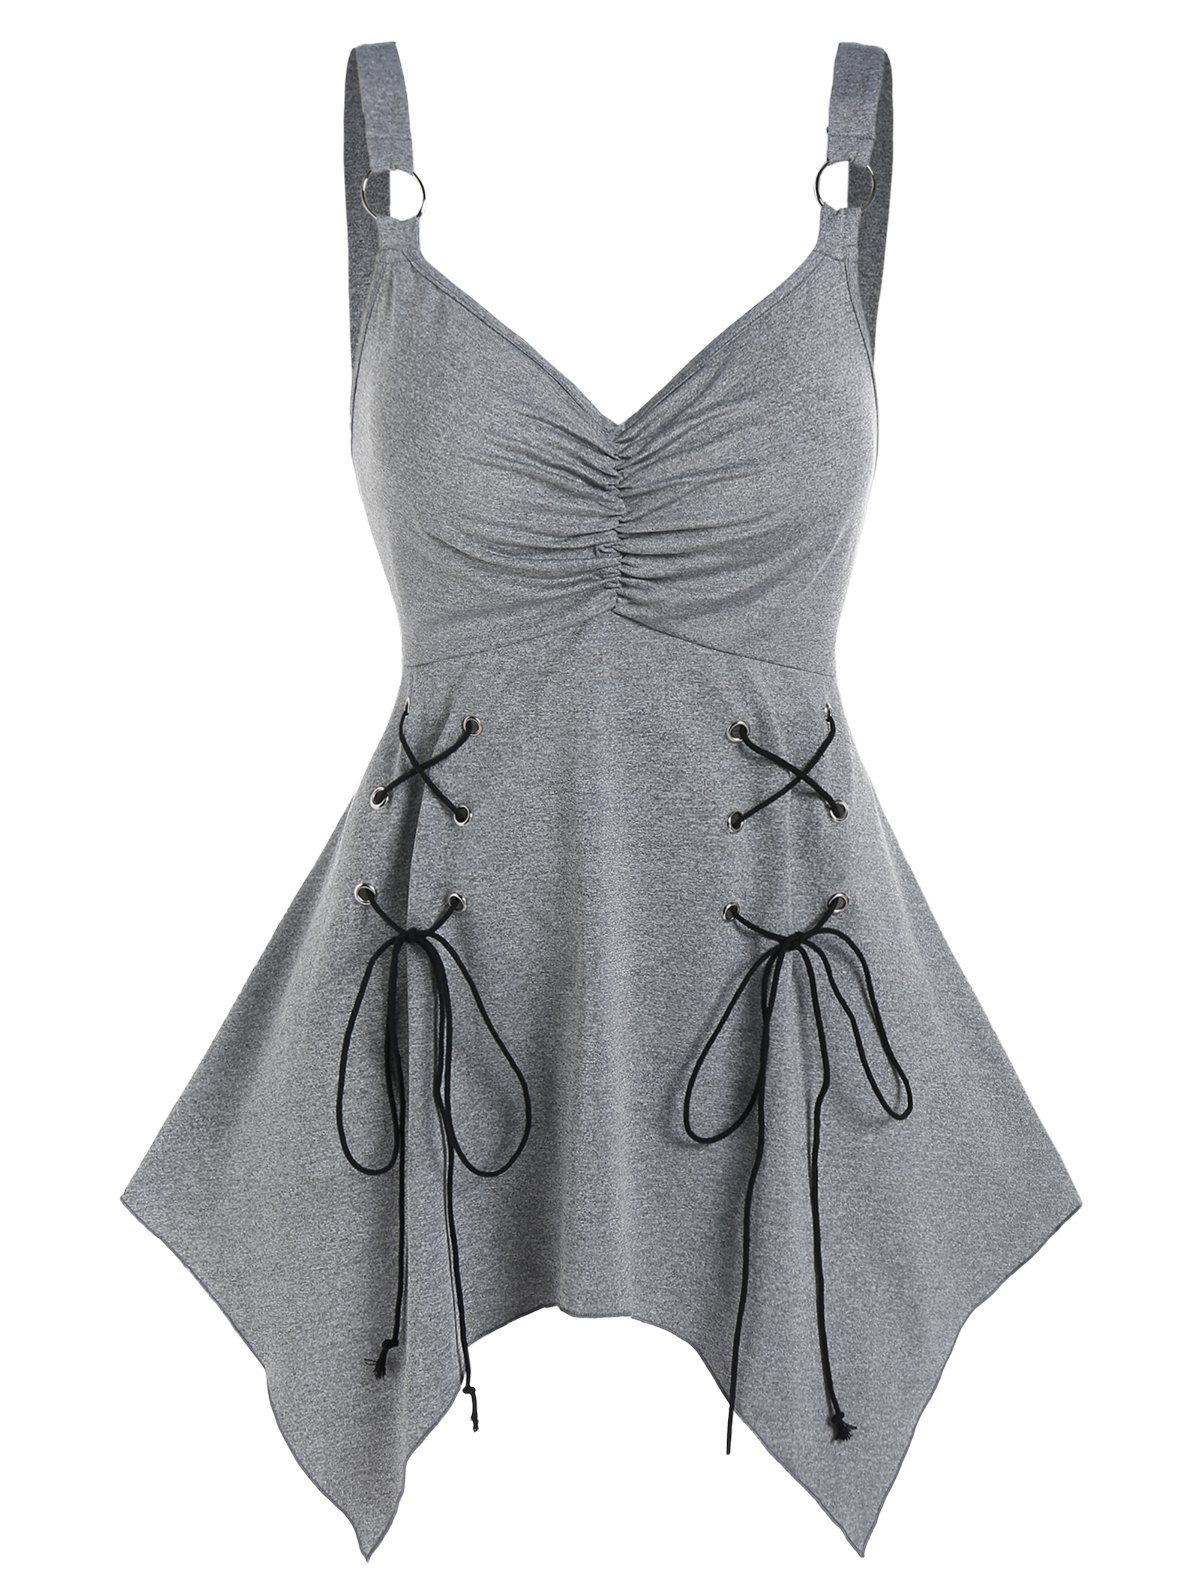 Grommet O Ring Ruched Handkerchief Tank Top - LIGHT GRAY L